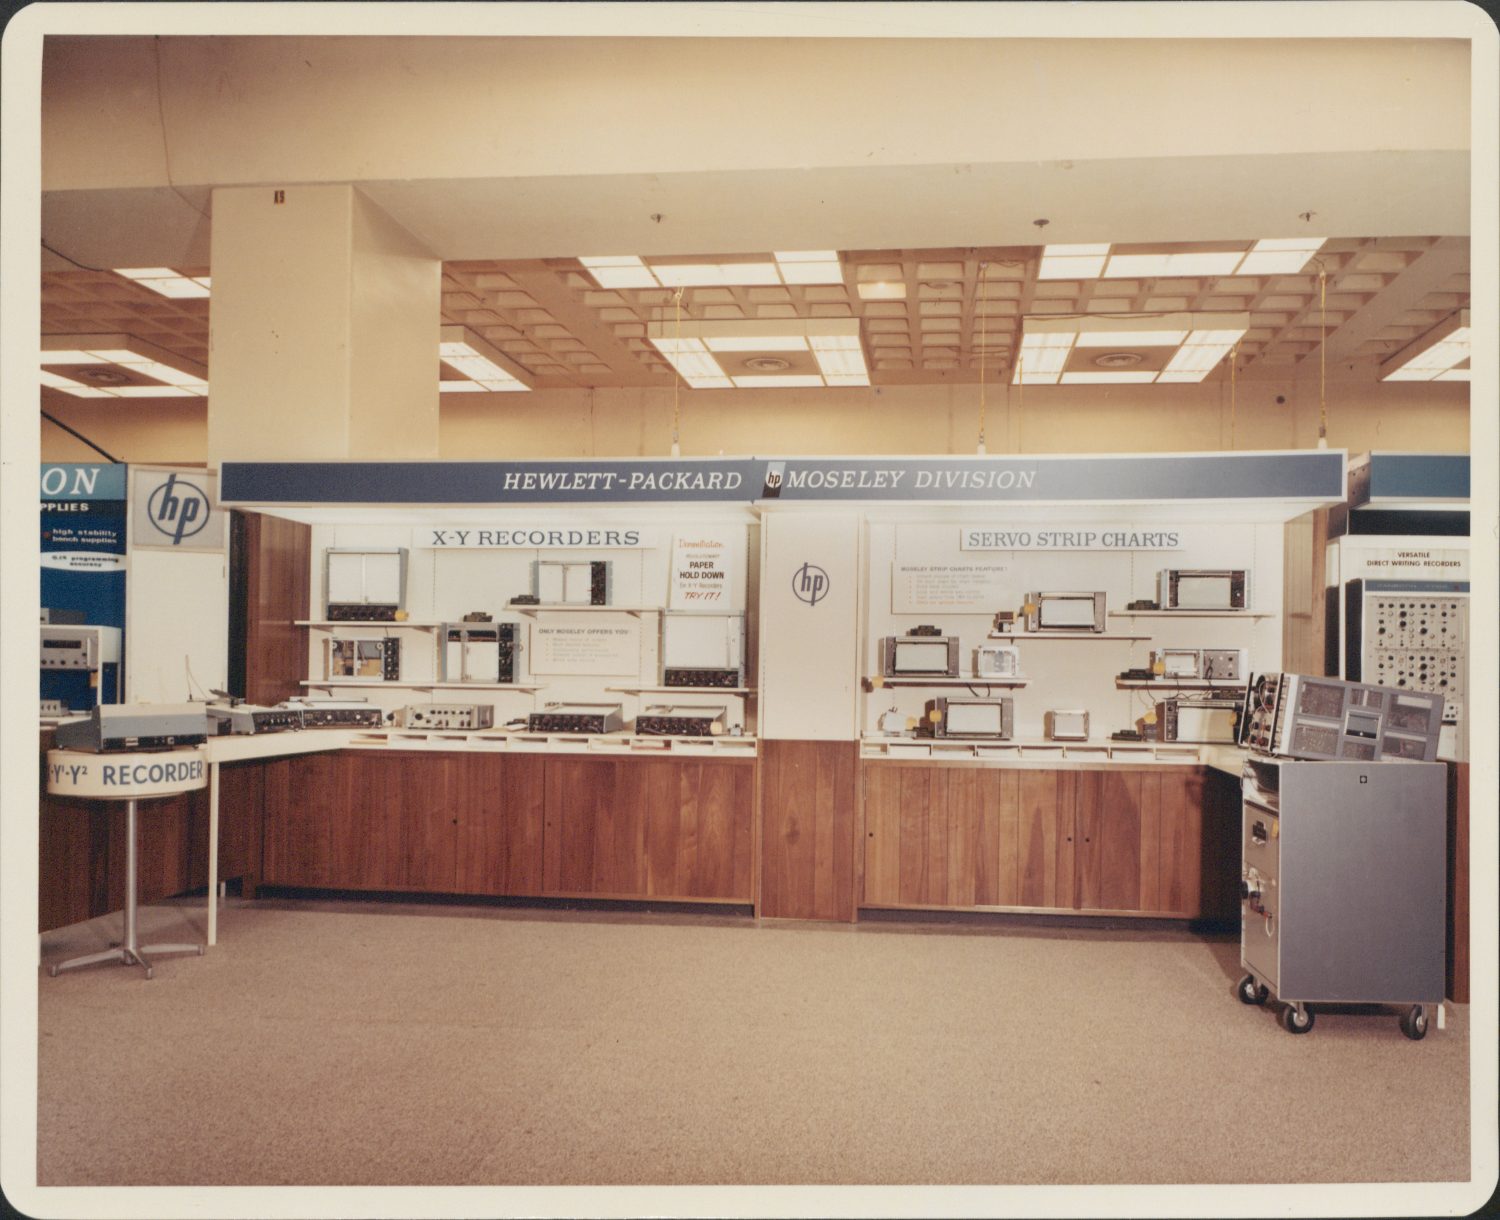 Trade show display for the products of Hewlett-Packard's Moseley Division.